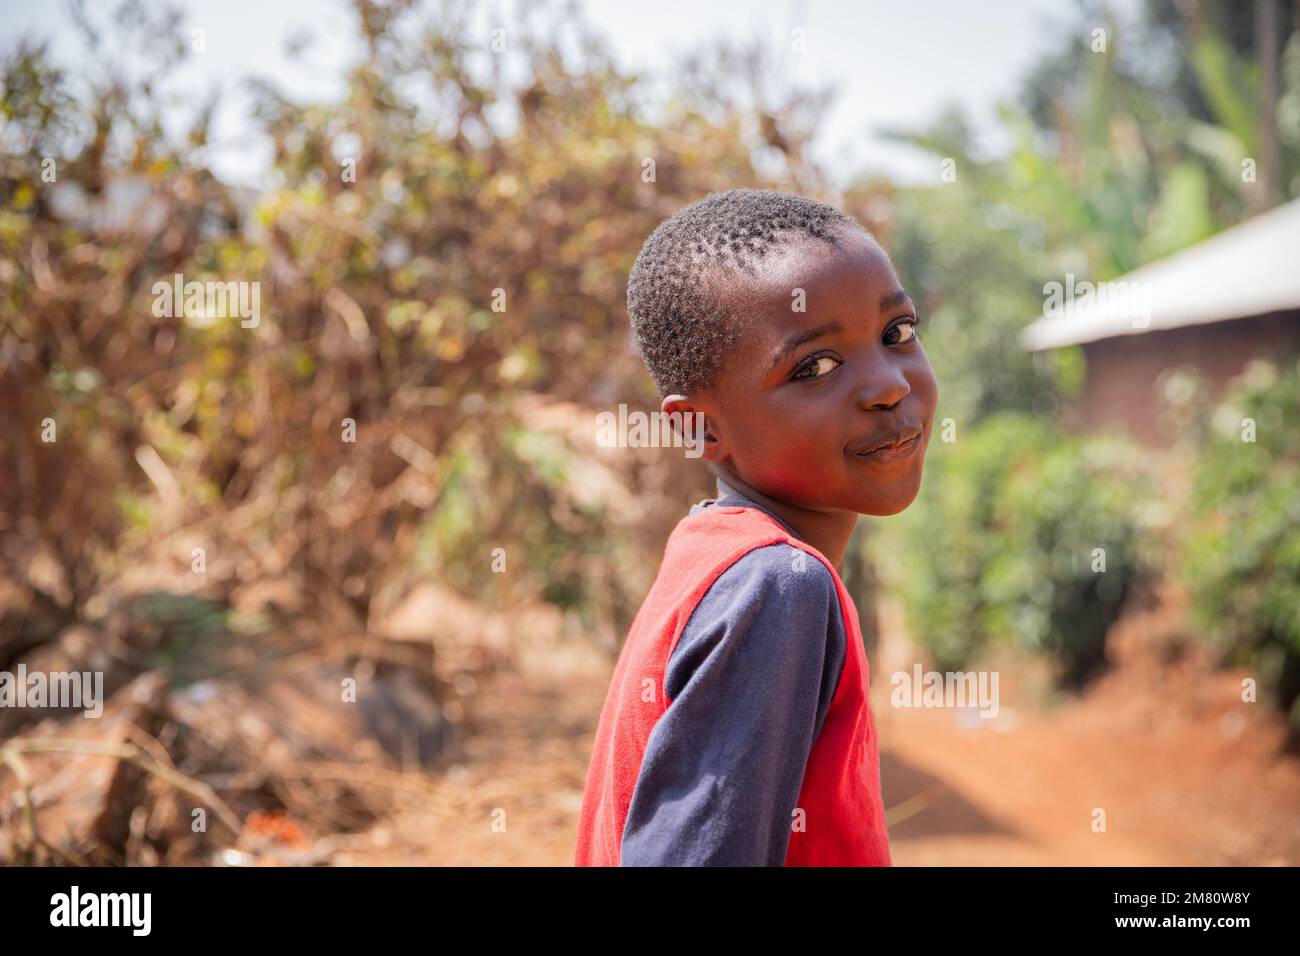 Portrait of a smiling African child in the village, photo with copy space Stock Photo